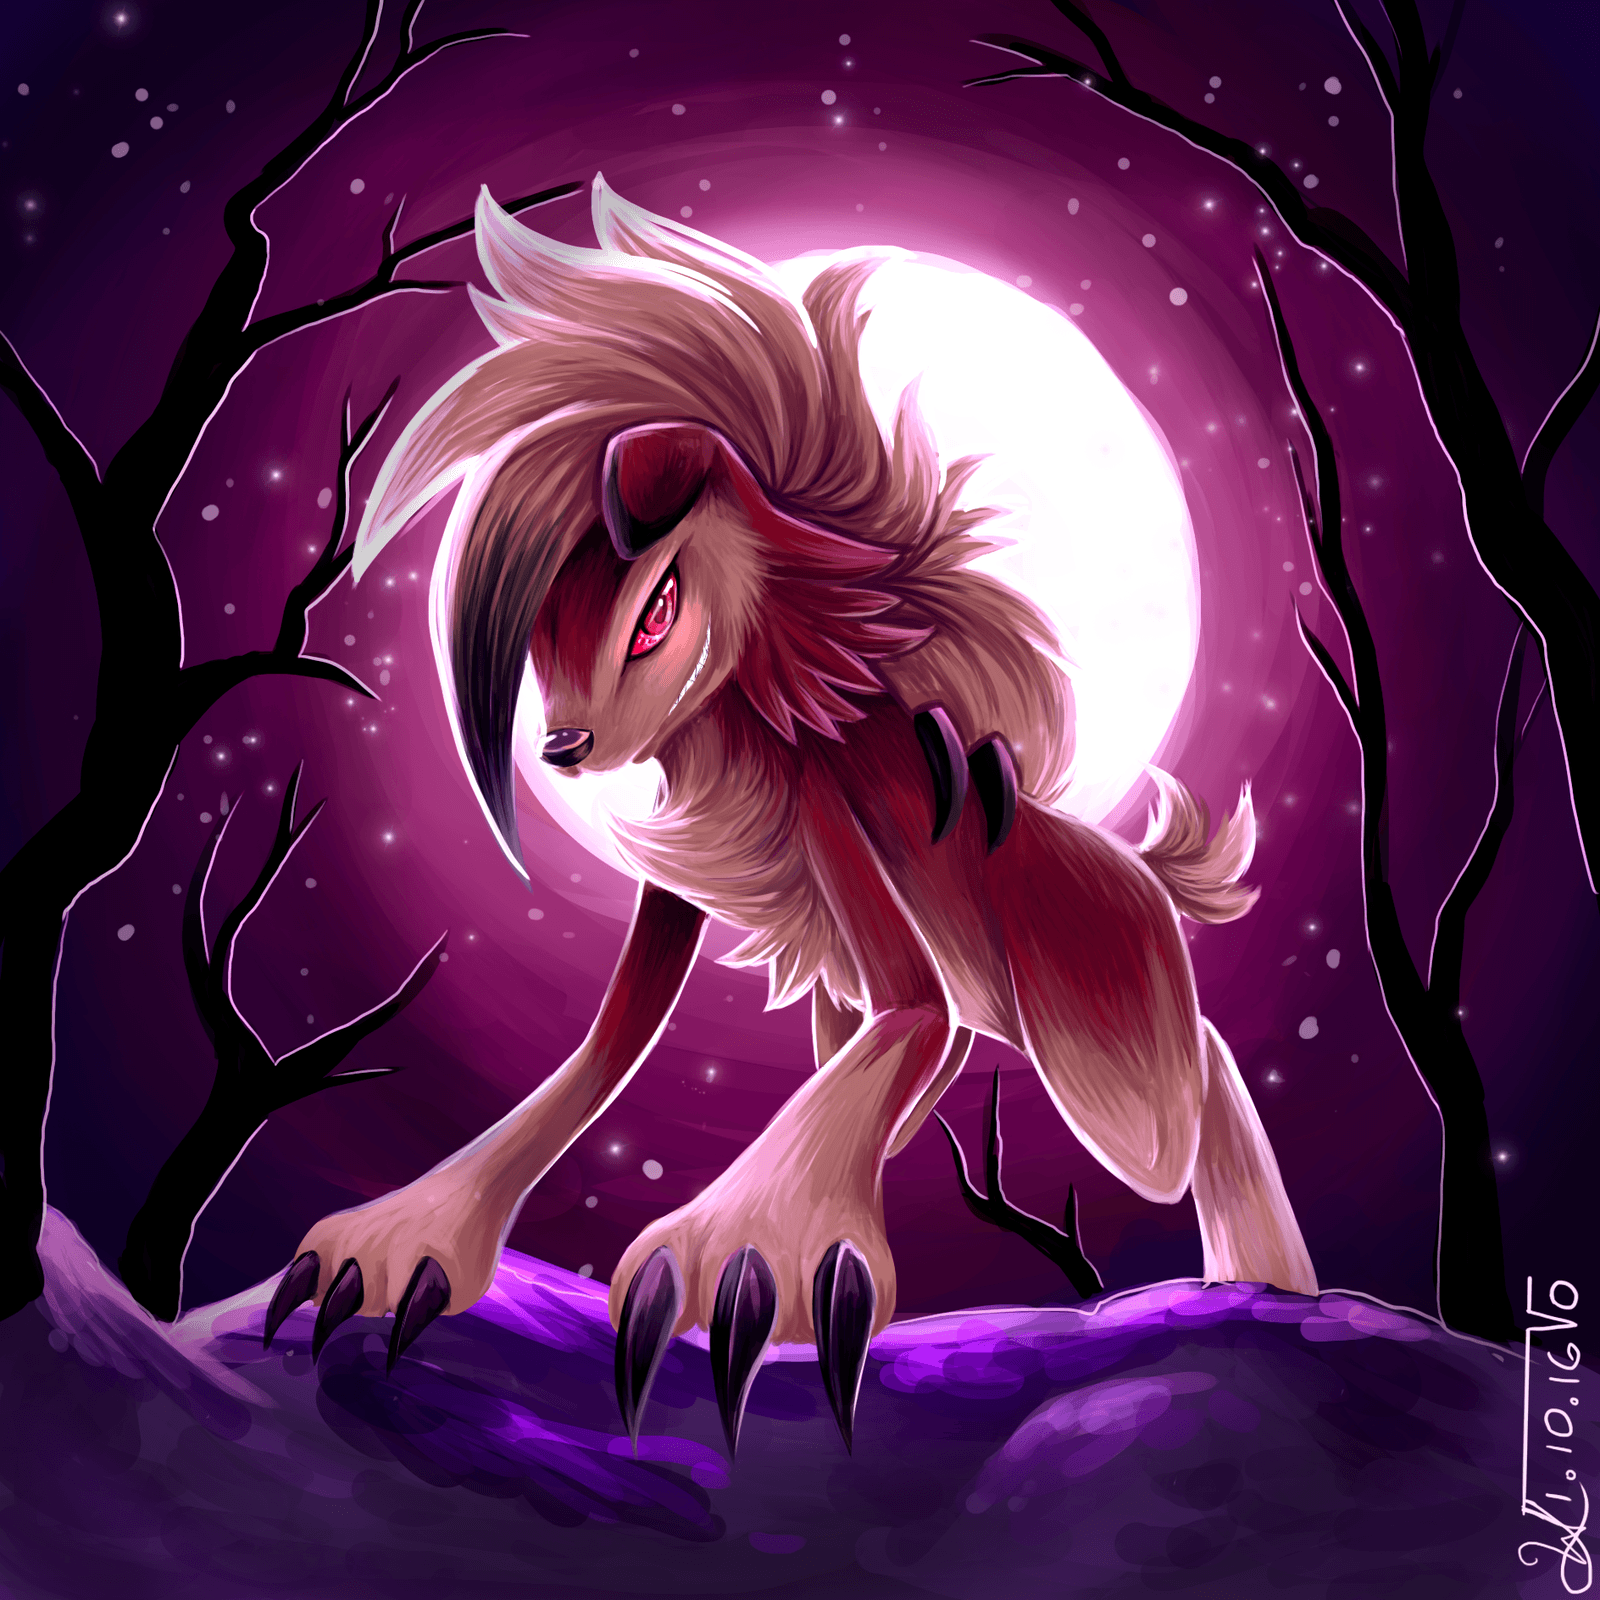 lycanroc dusk form for sun and moon